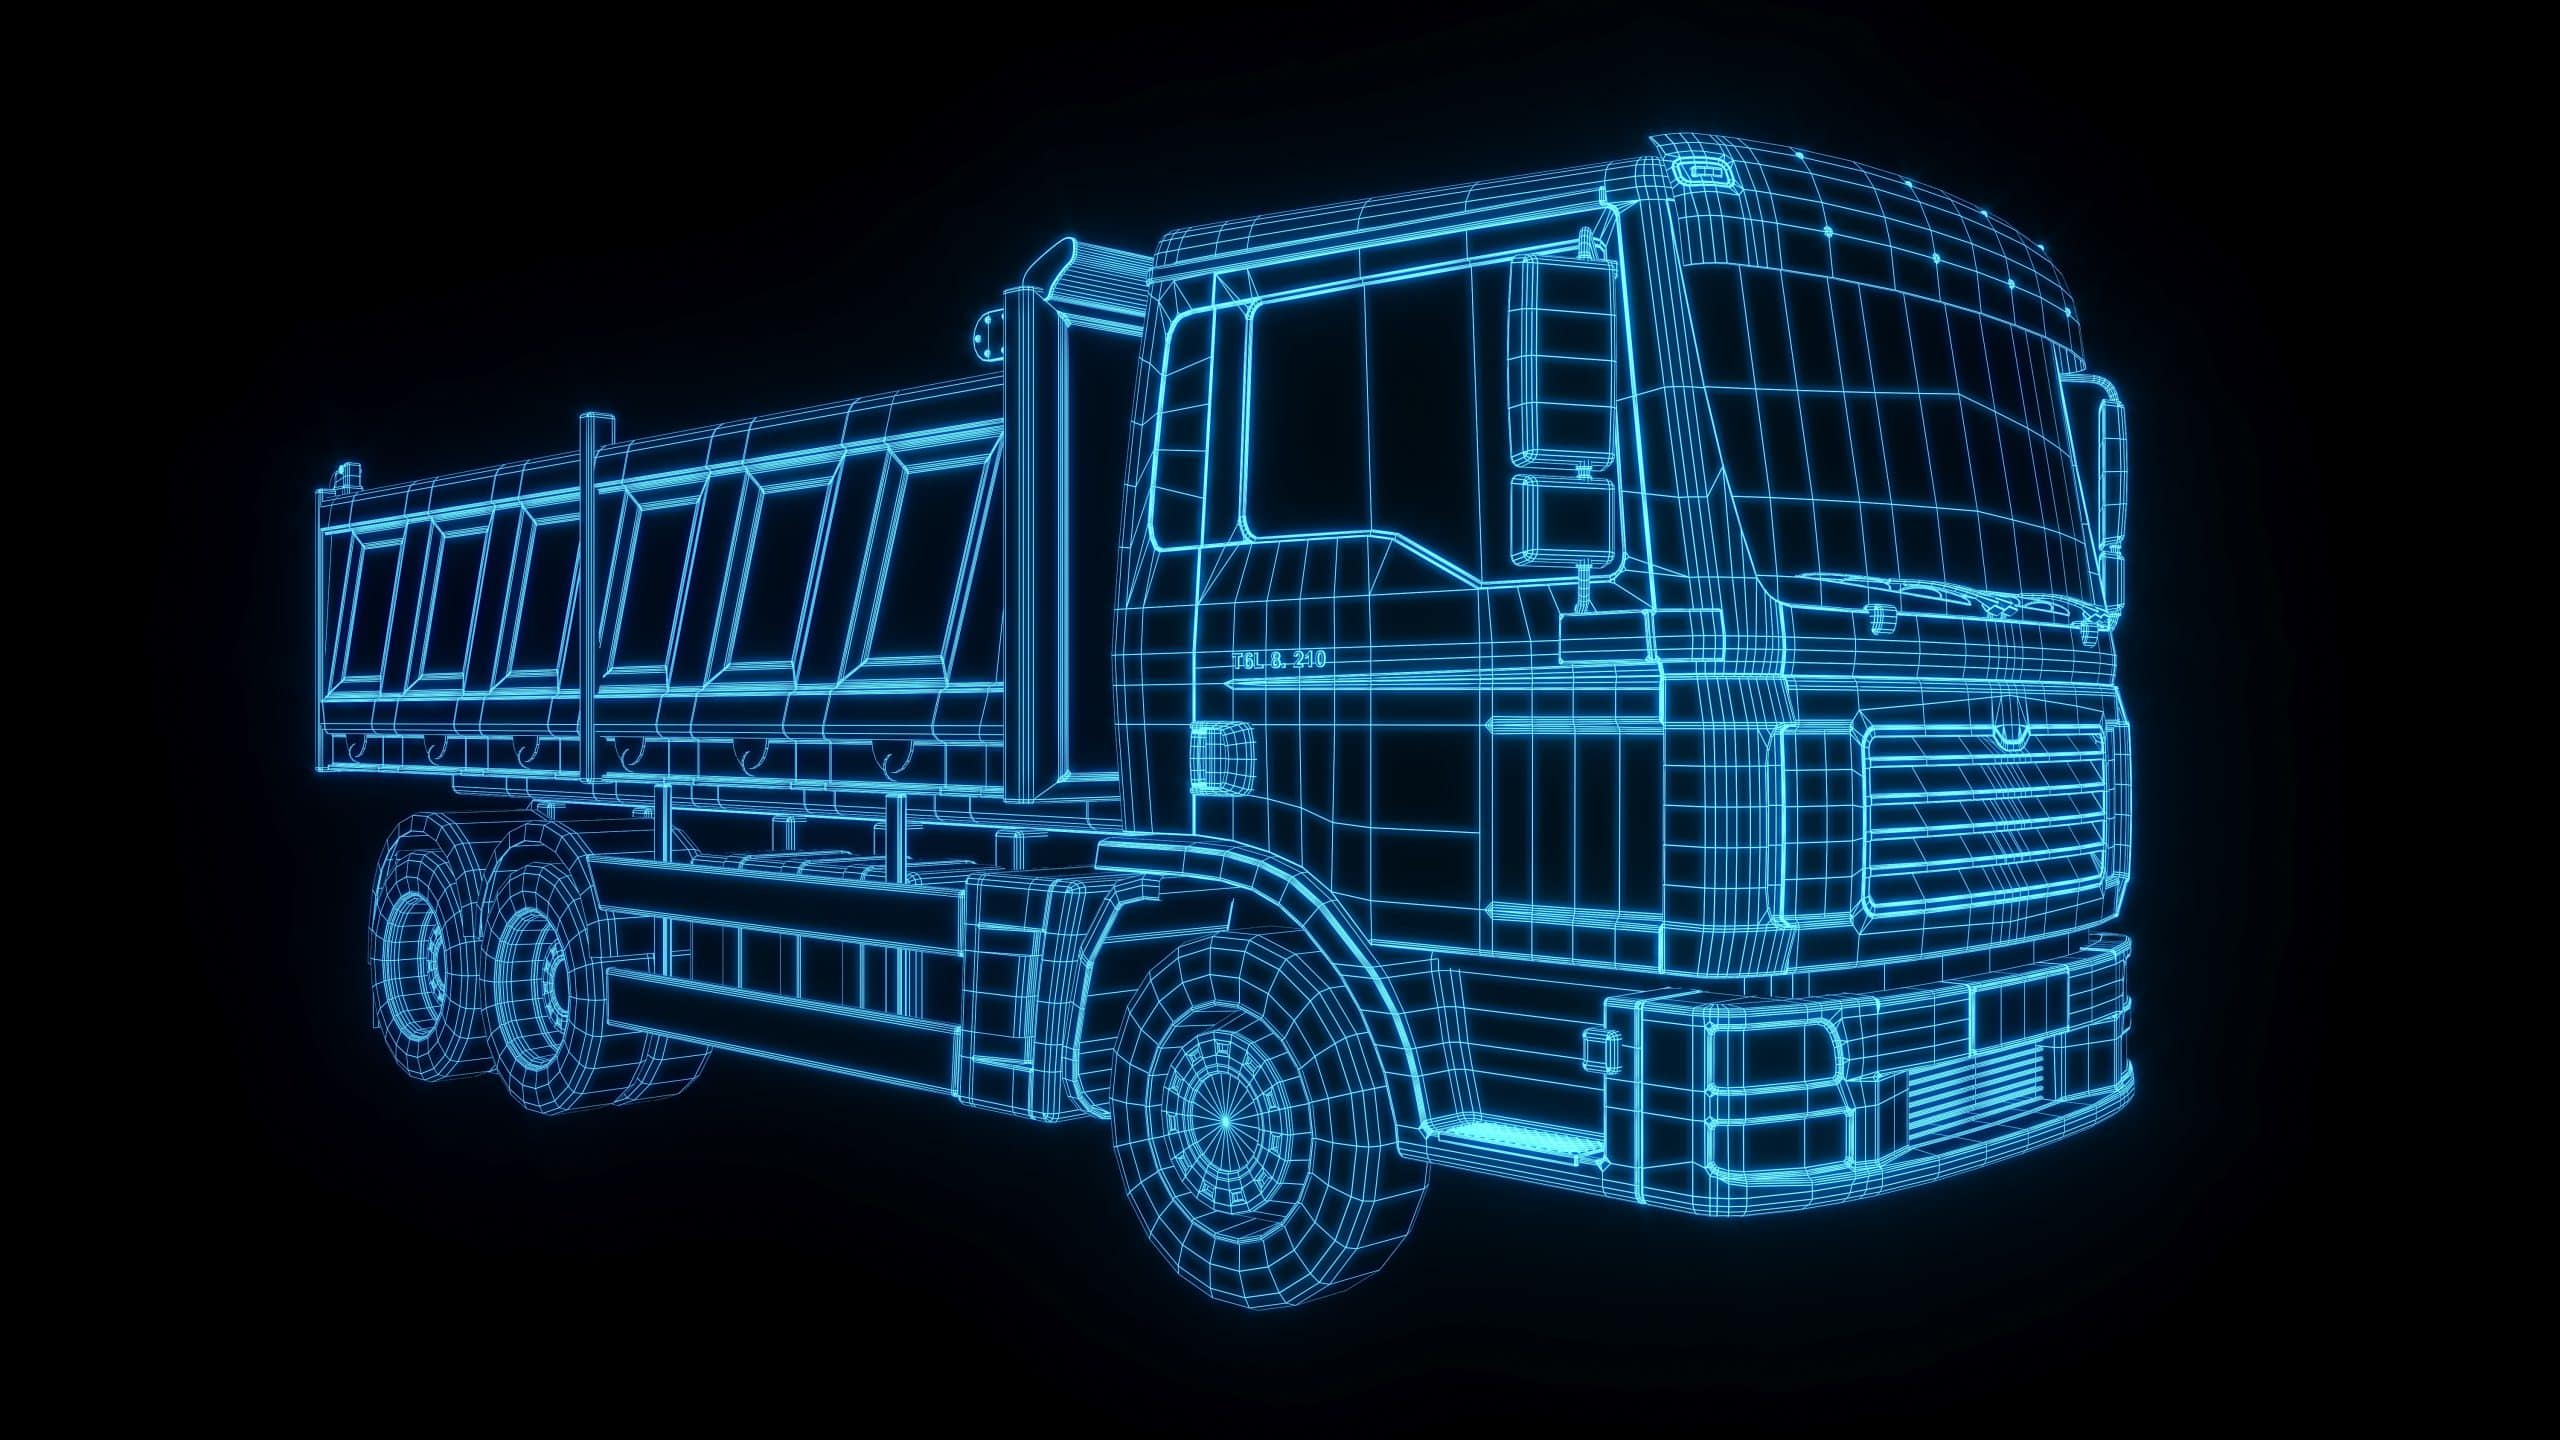 Implementing 3-D profiling computer software in your truck washing business